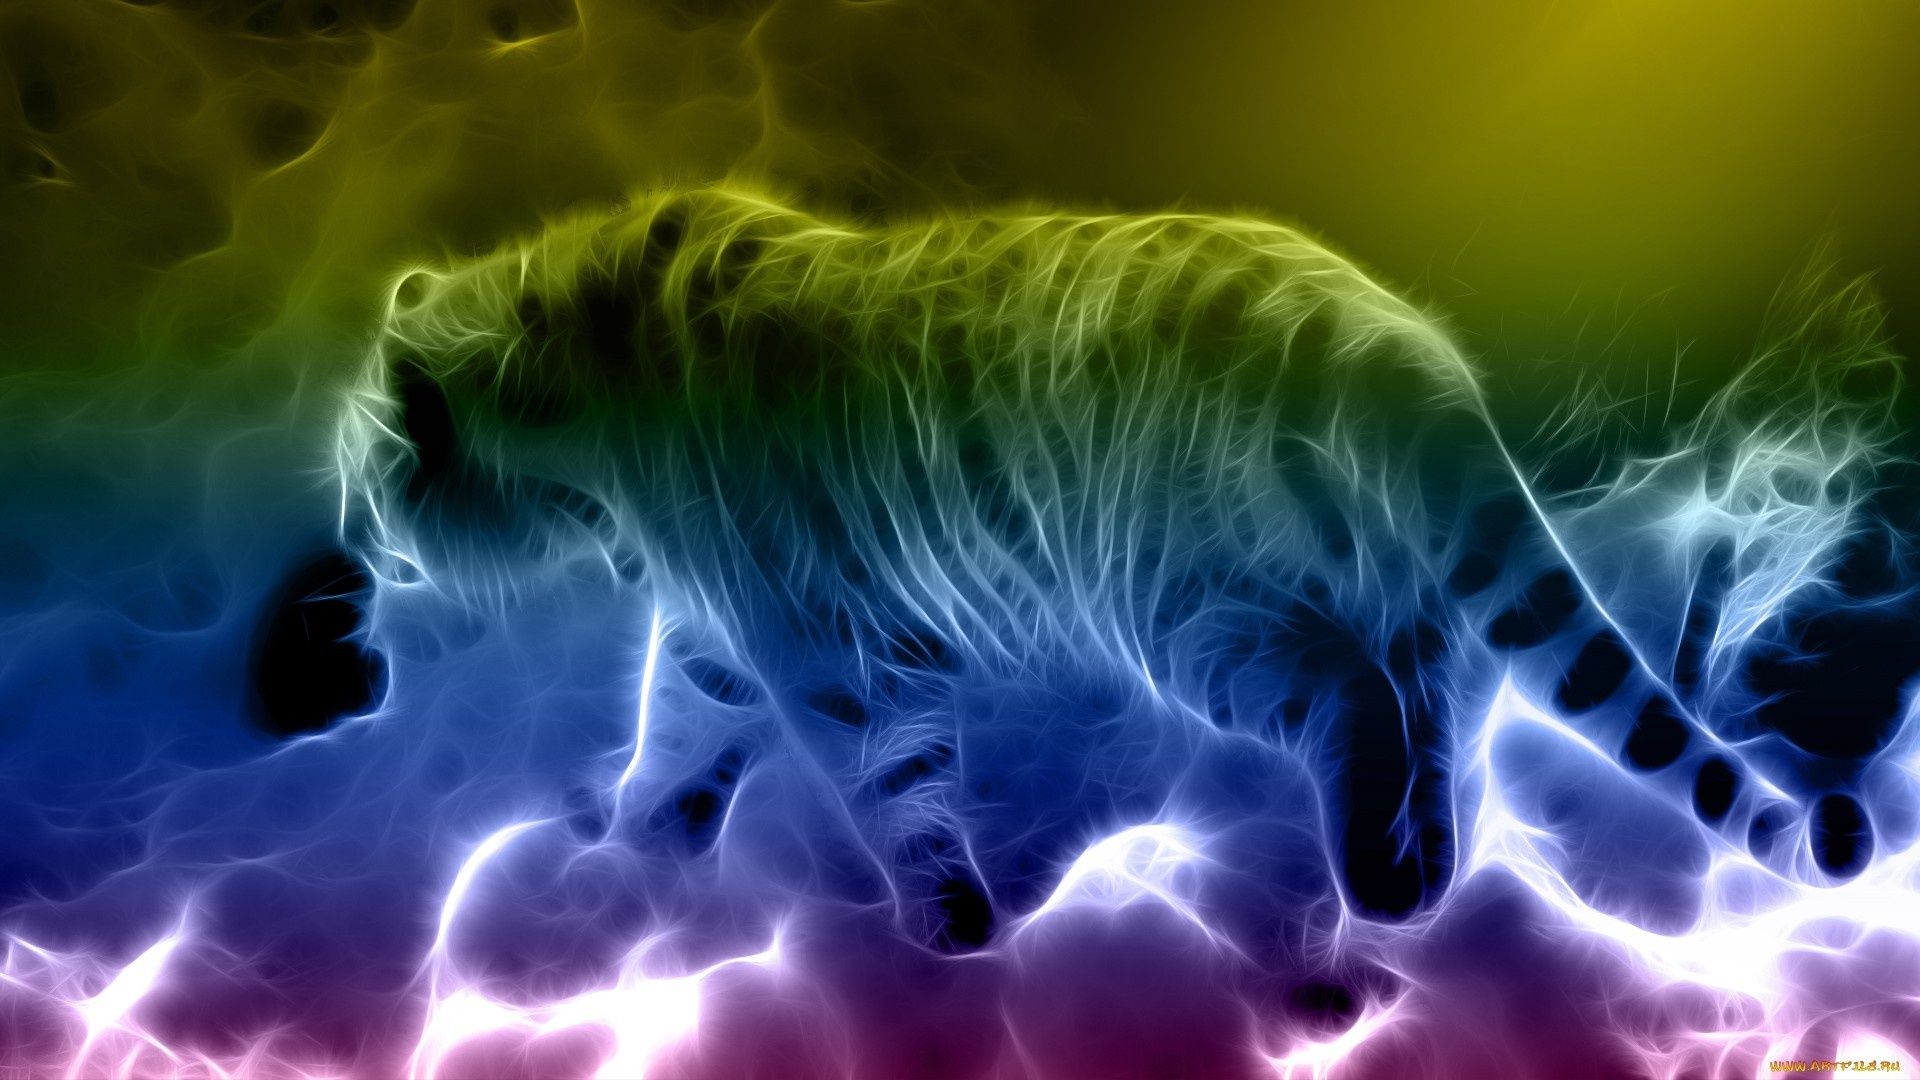 Free download art abstract fractal animals cats tiger rainbow predator wildlife [1920x1080] for your Desktop, Mobile & Tablet. Explore Abstract Animal Wallpaper. Free Abstract Desktop Wallpaper, Animal Wallpaper, Cheetah